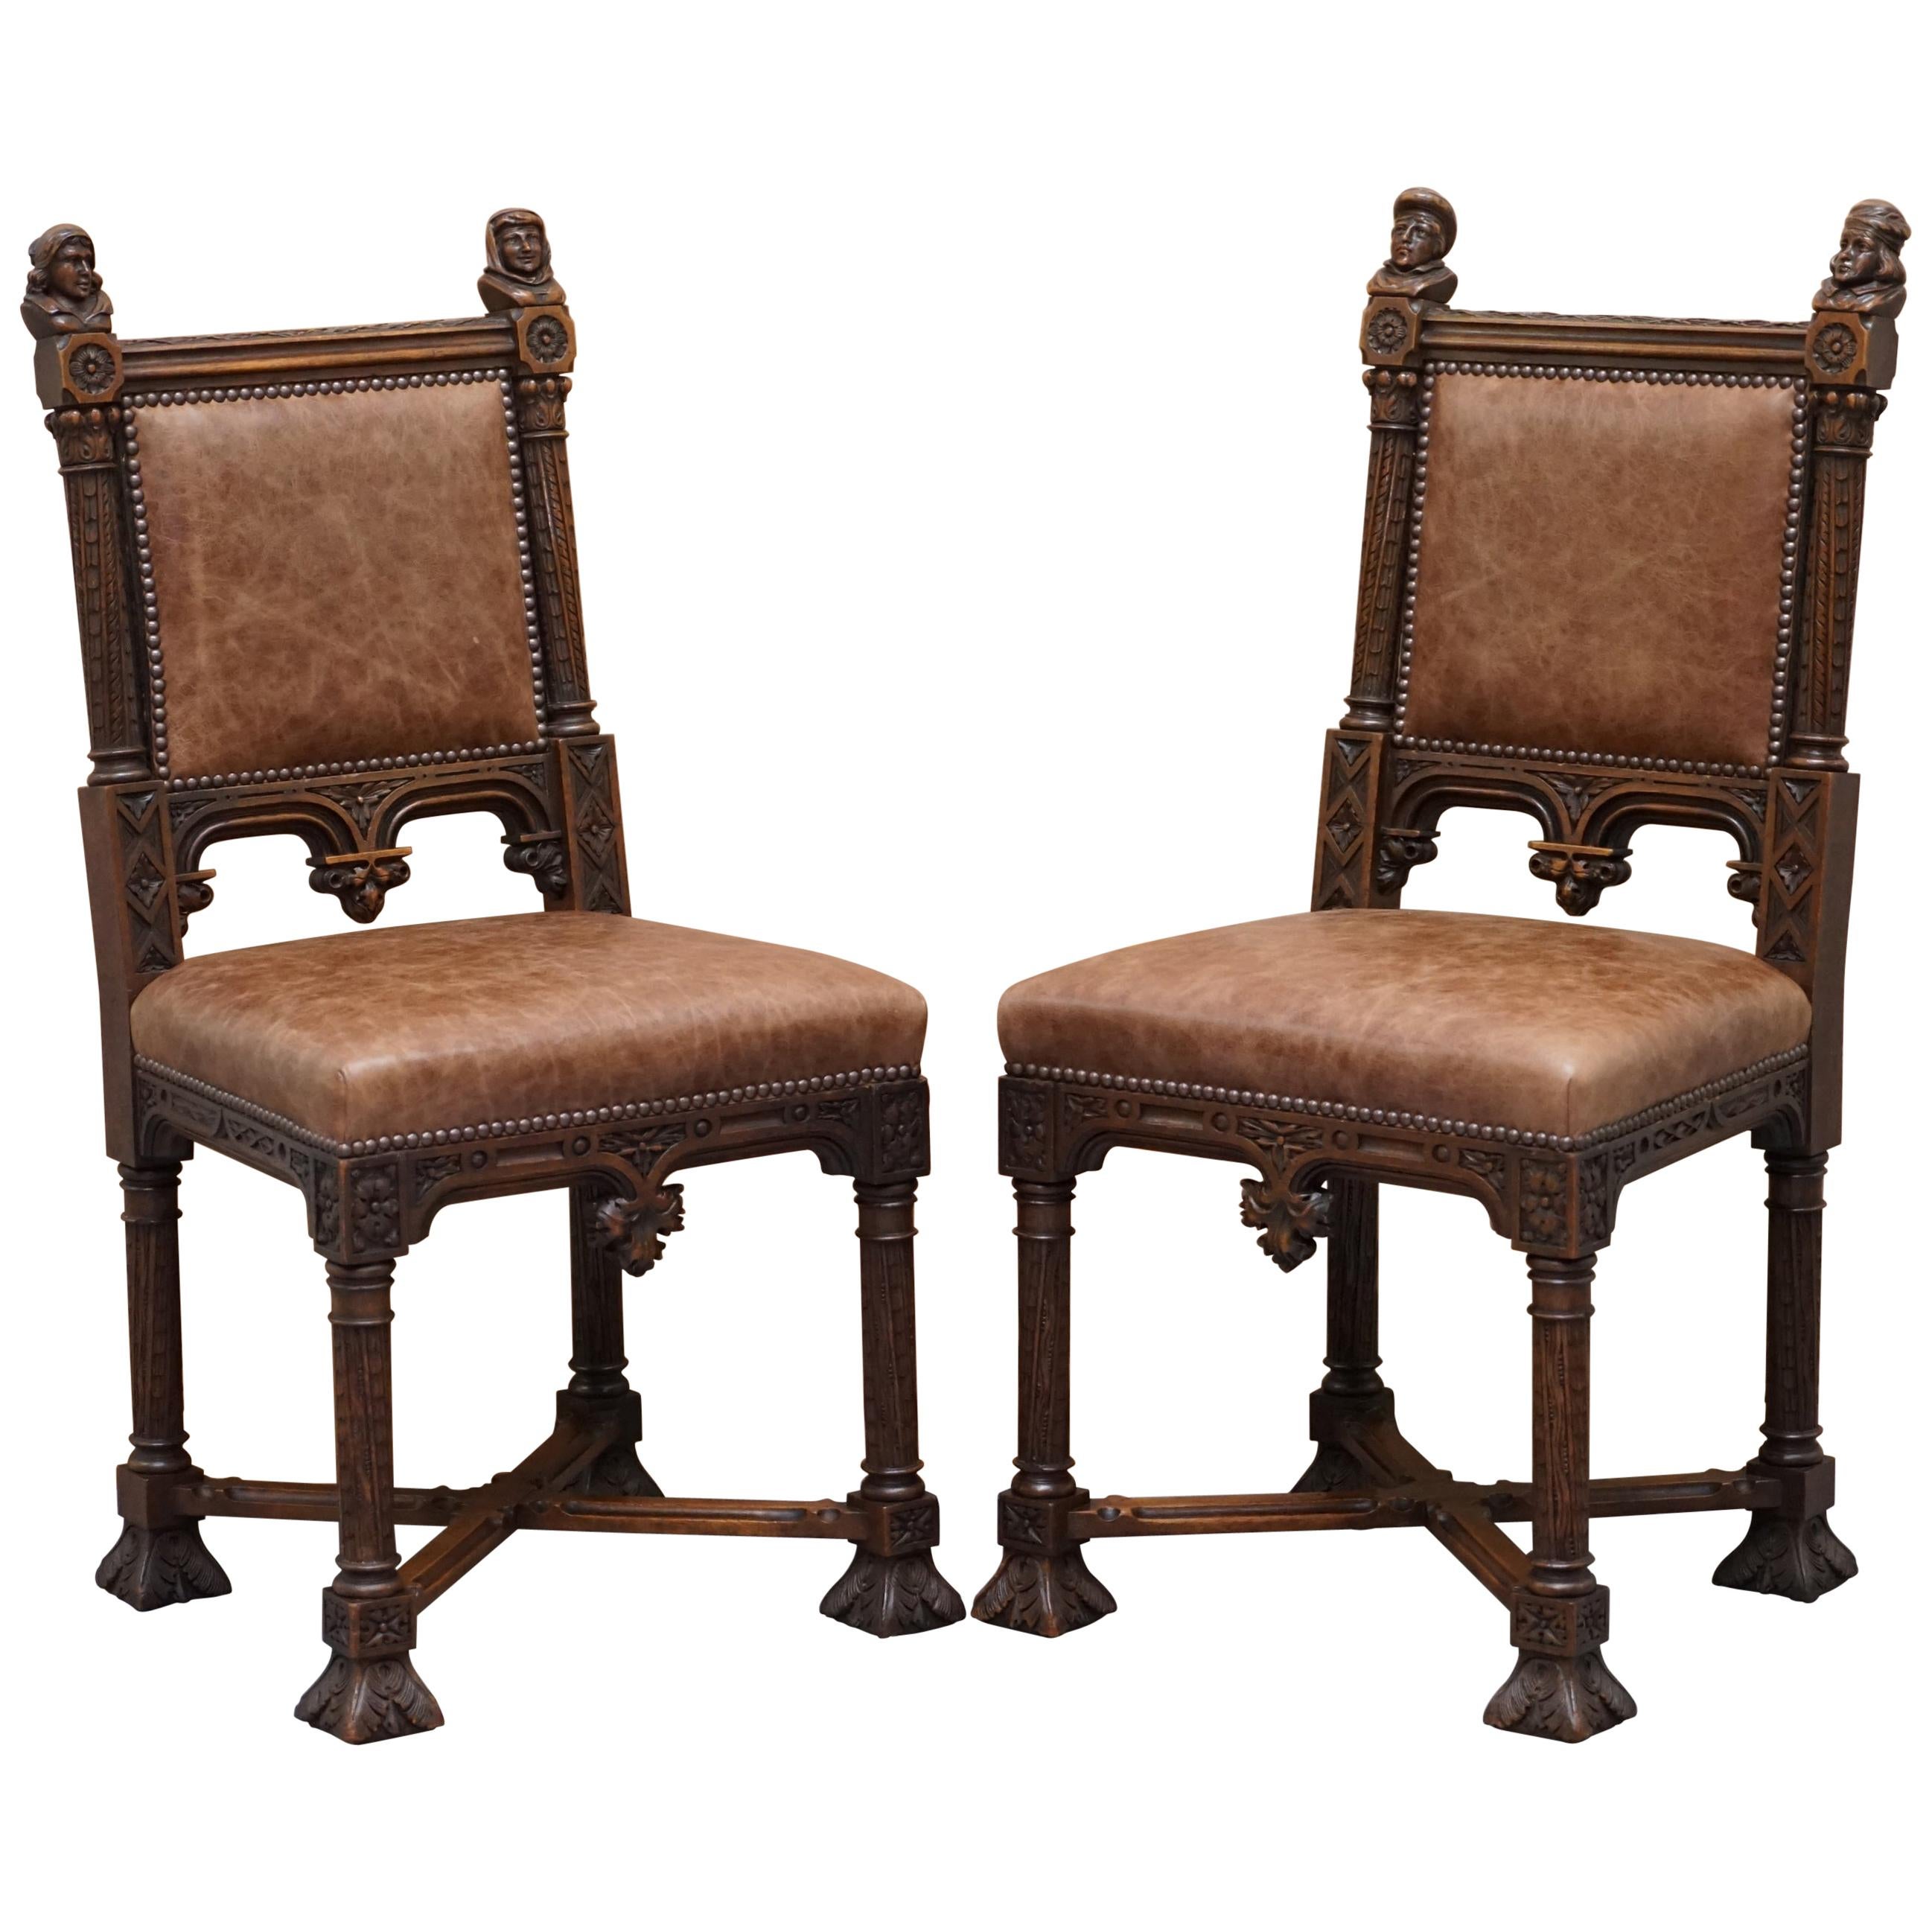 Pair of Restored Victorian French Brown Leather Hand Carved Armchairs Gothic